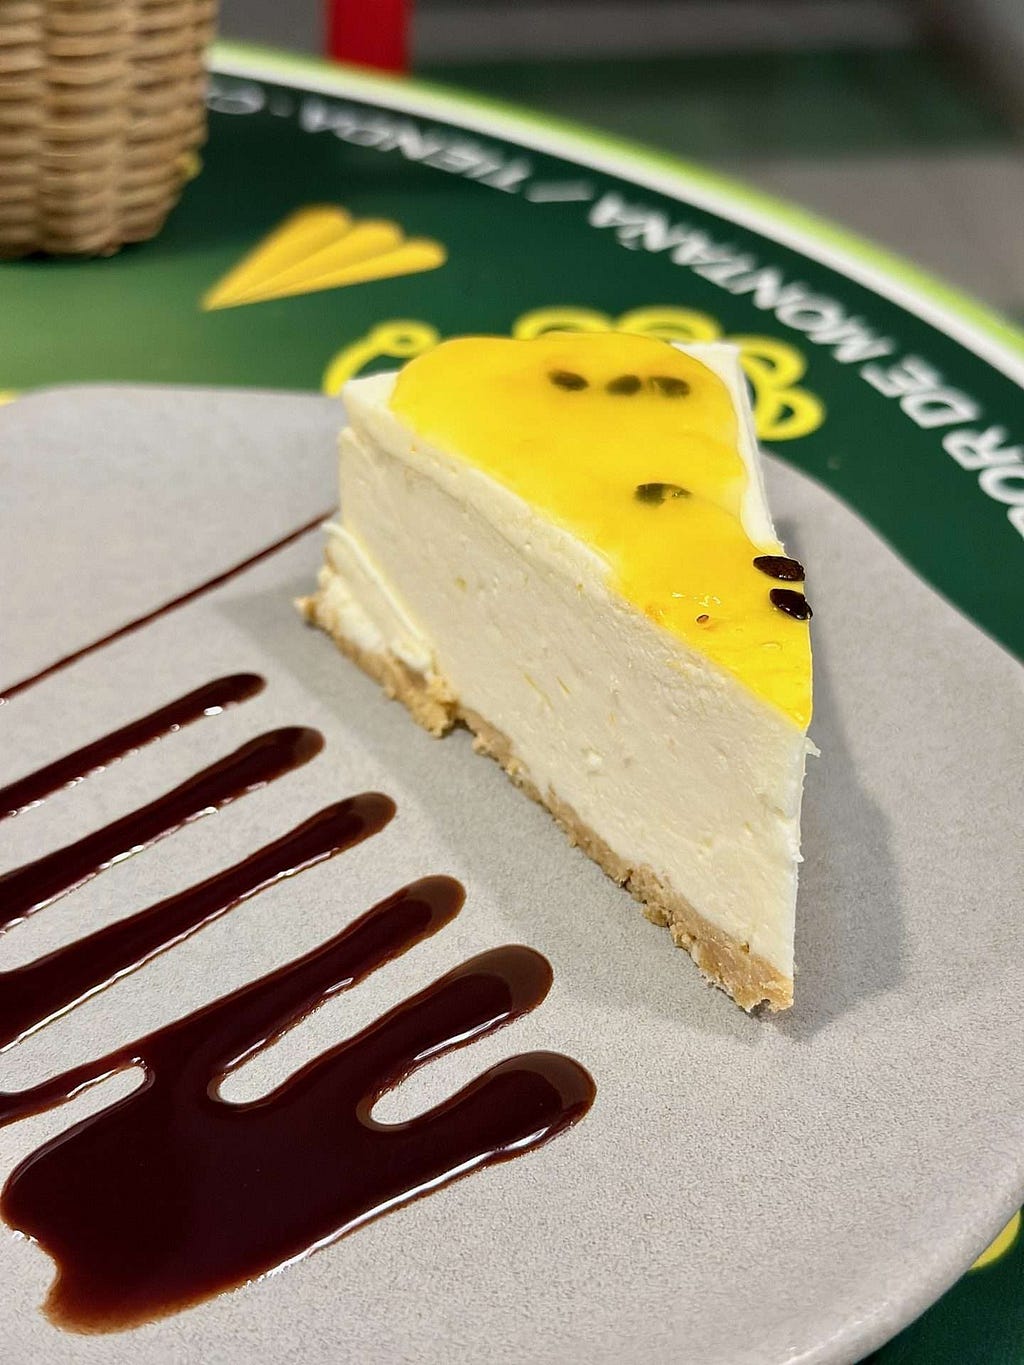 A slice of cheesecake with yellow passionfruit topping, served on a gray plate with chocolate sauce drizzled beside it. A delicious Cartagena, Colombia dessert